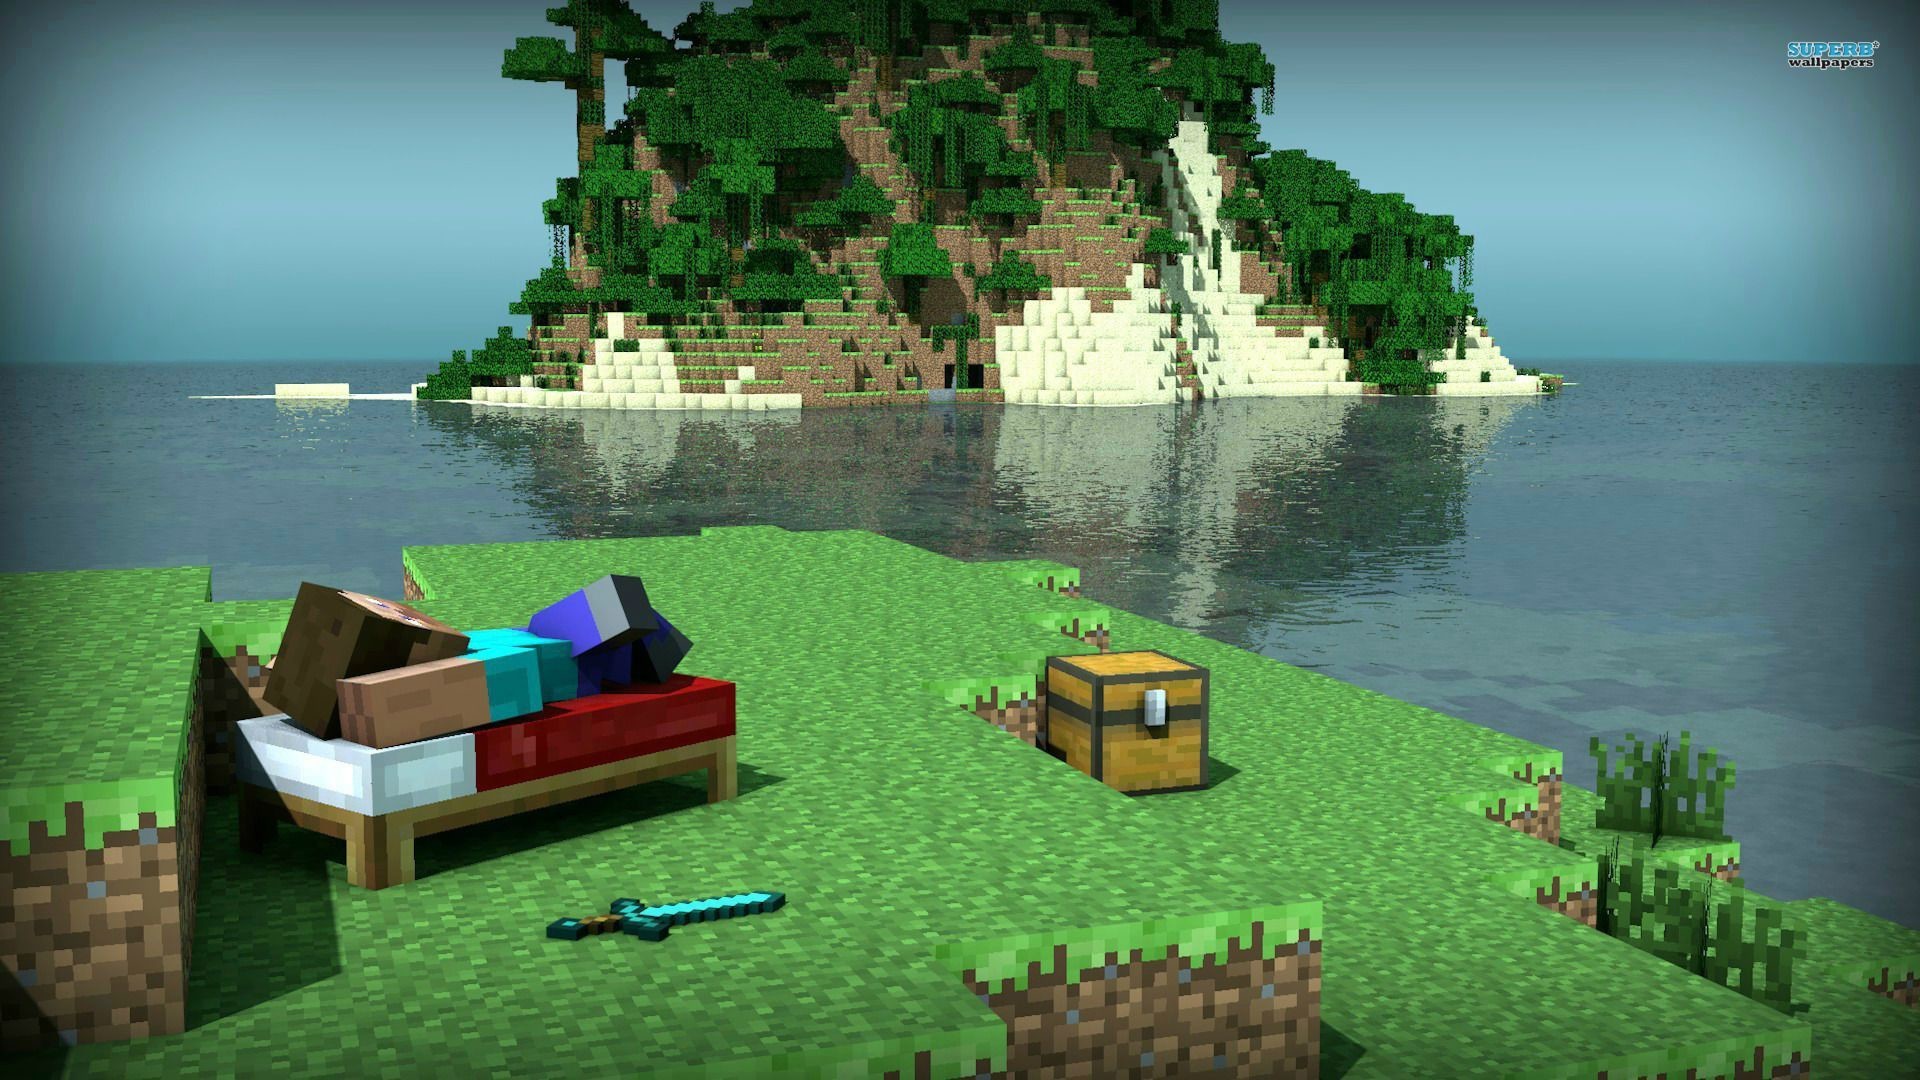 1920x1080 Collection of Amazing Minecraft Wallpapers on HDWallpapers Minecraft  Backgrounds Picture Wallpapers)